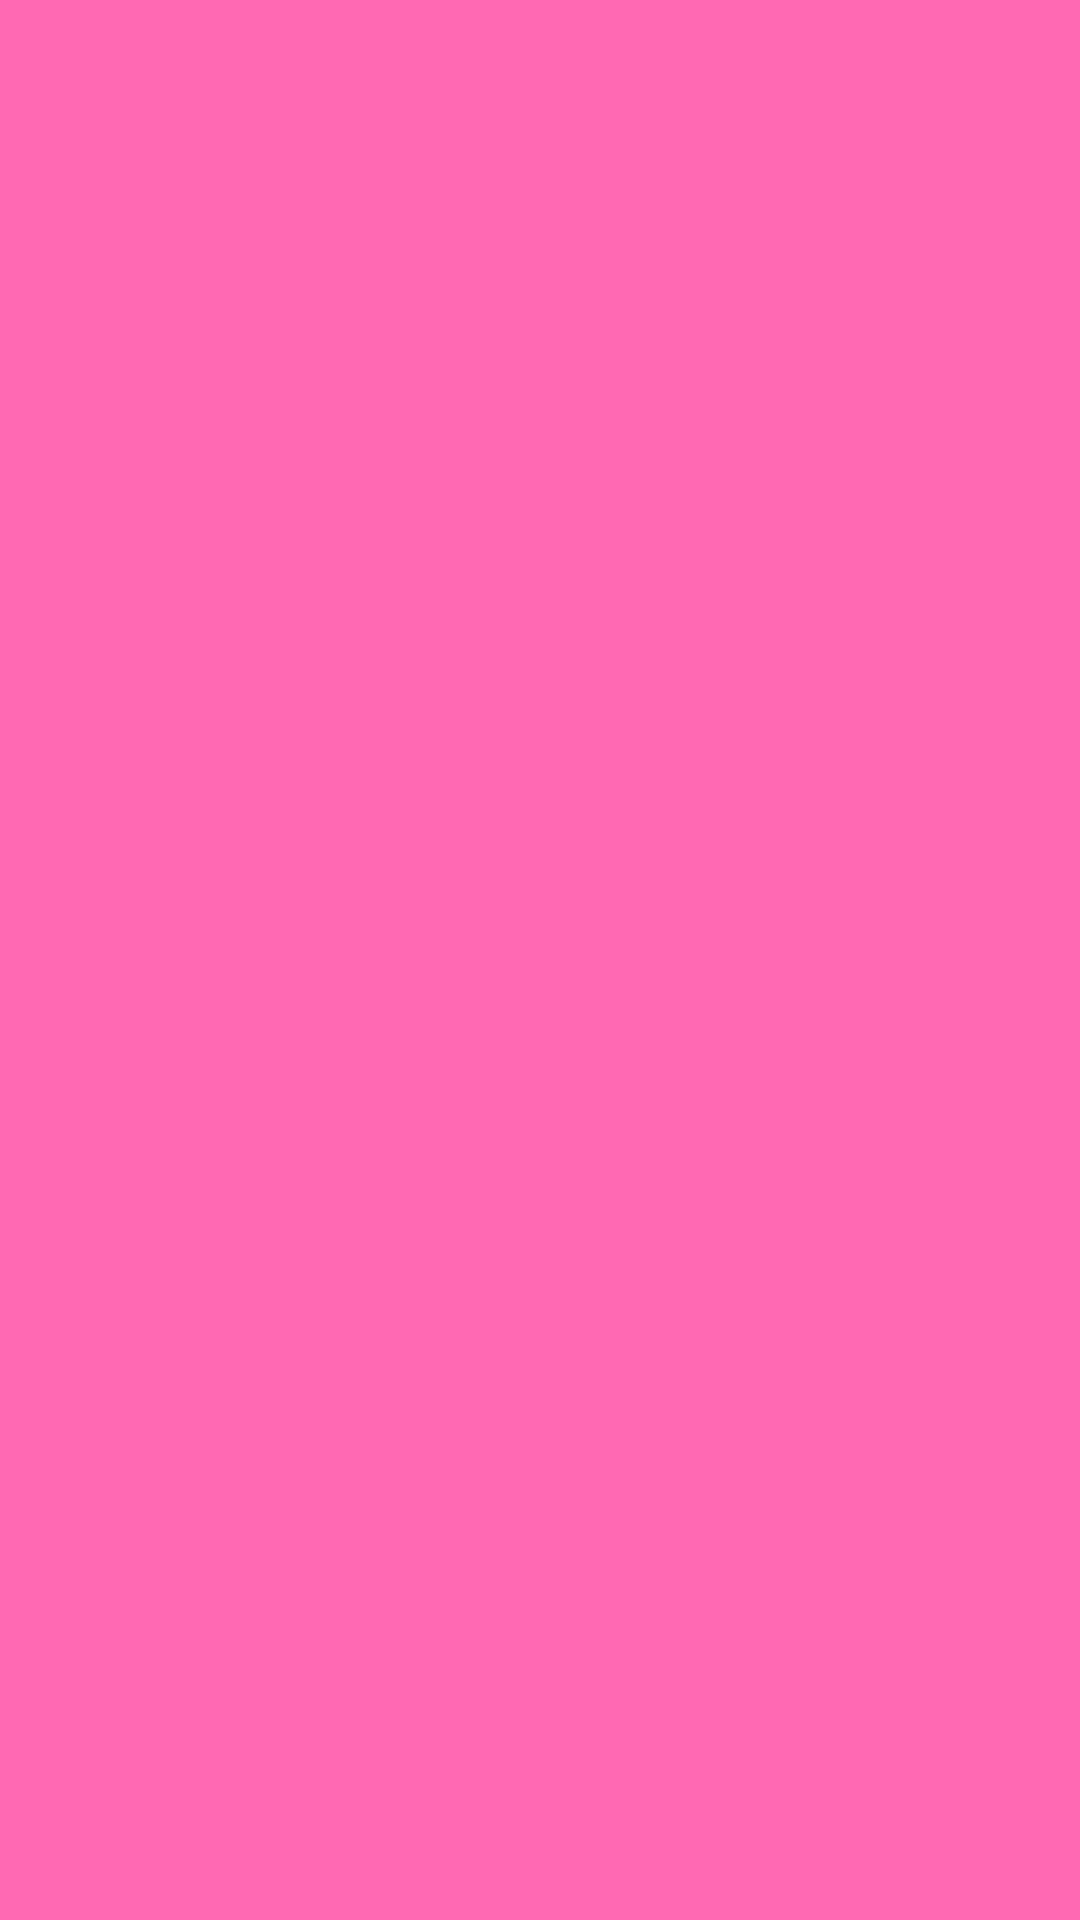 Pure Pink Wallpaper Android with HD resolution 1080x1920